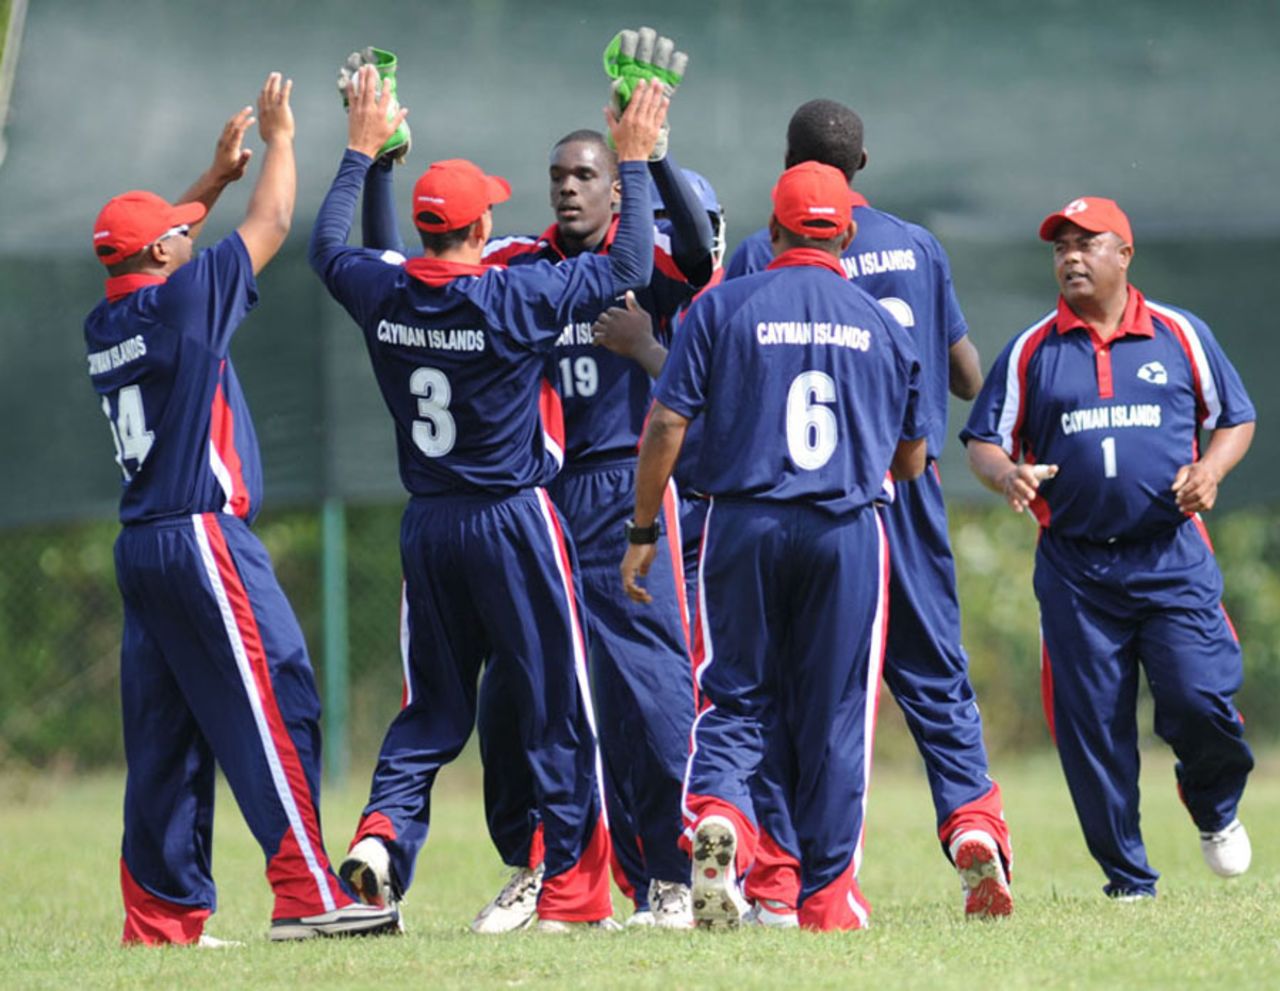 The Cayman Islands players celebrate the fall of an Argentinian wicket, Argentina v Cayman Islands, ICC World Cricket League Division Four, Pianoro, August 16, 2010